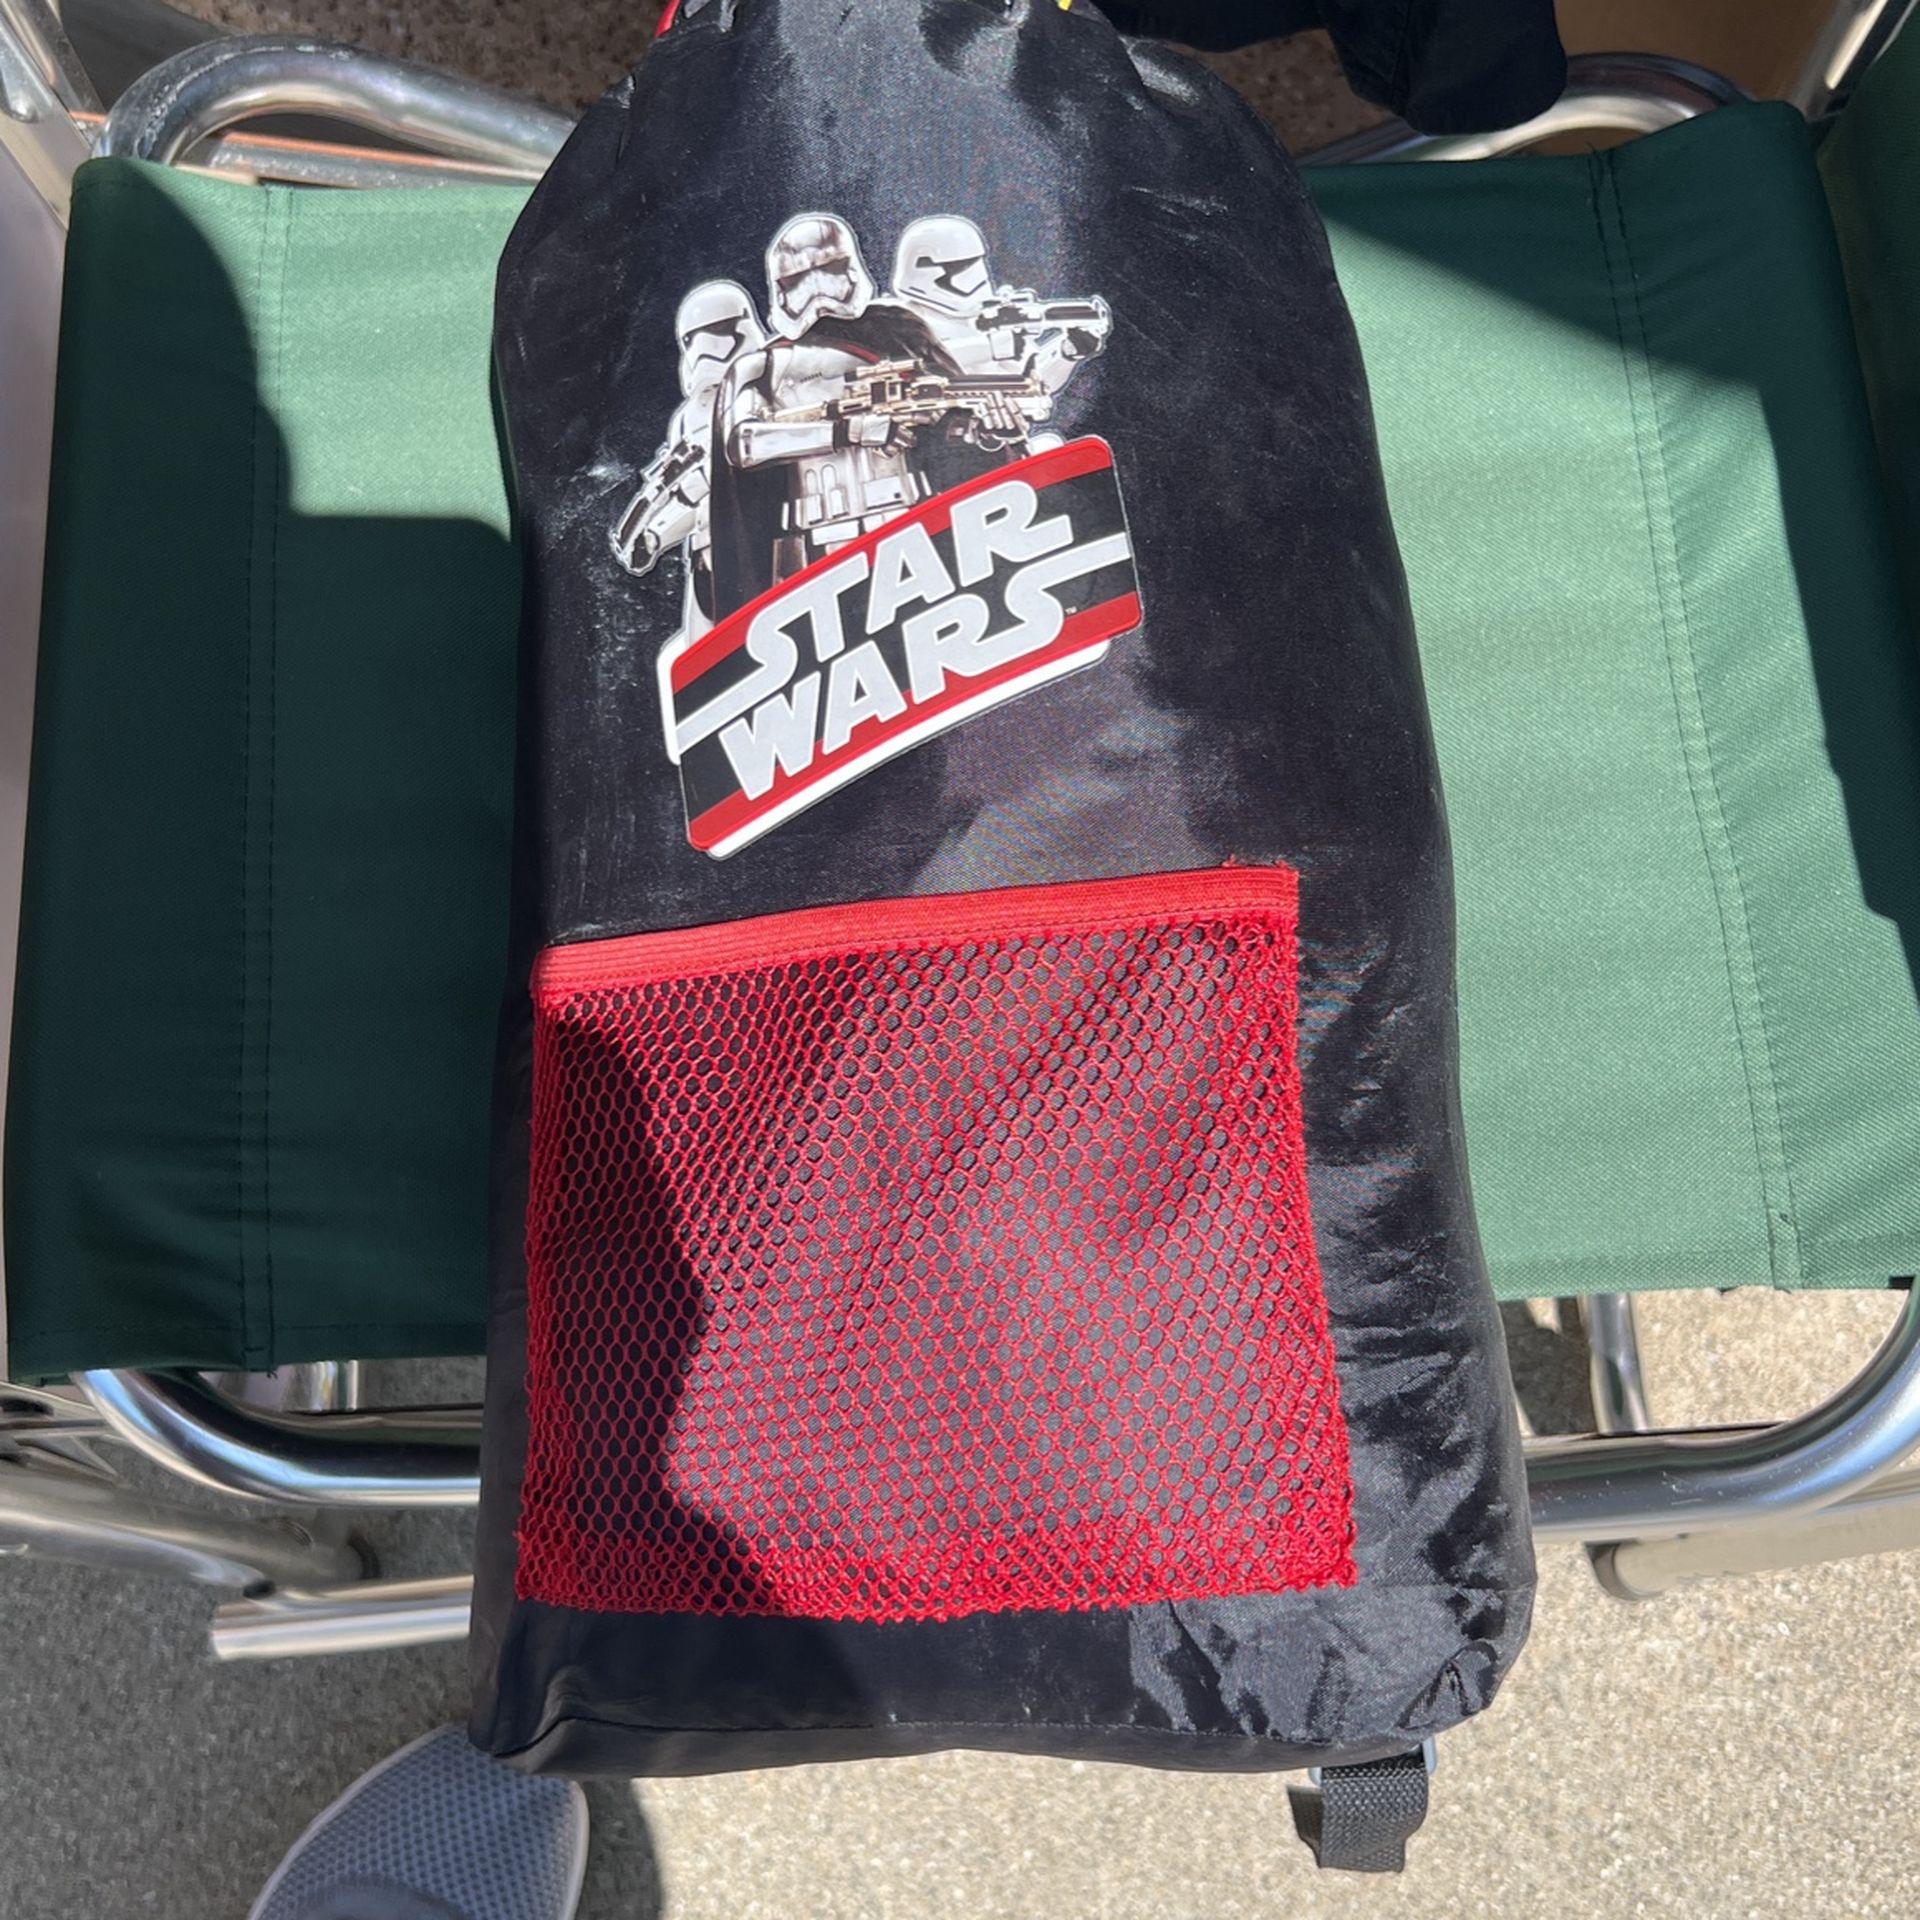 Star Wars Pup Tent With Sleeping Bag